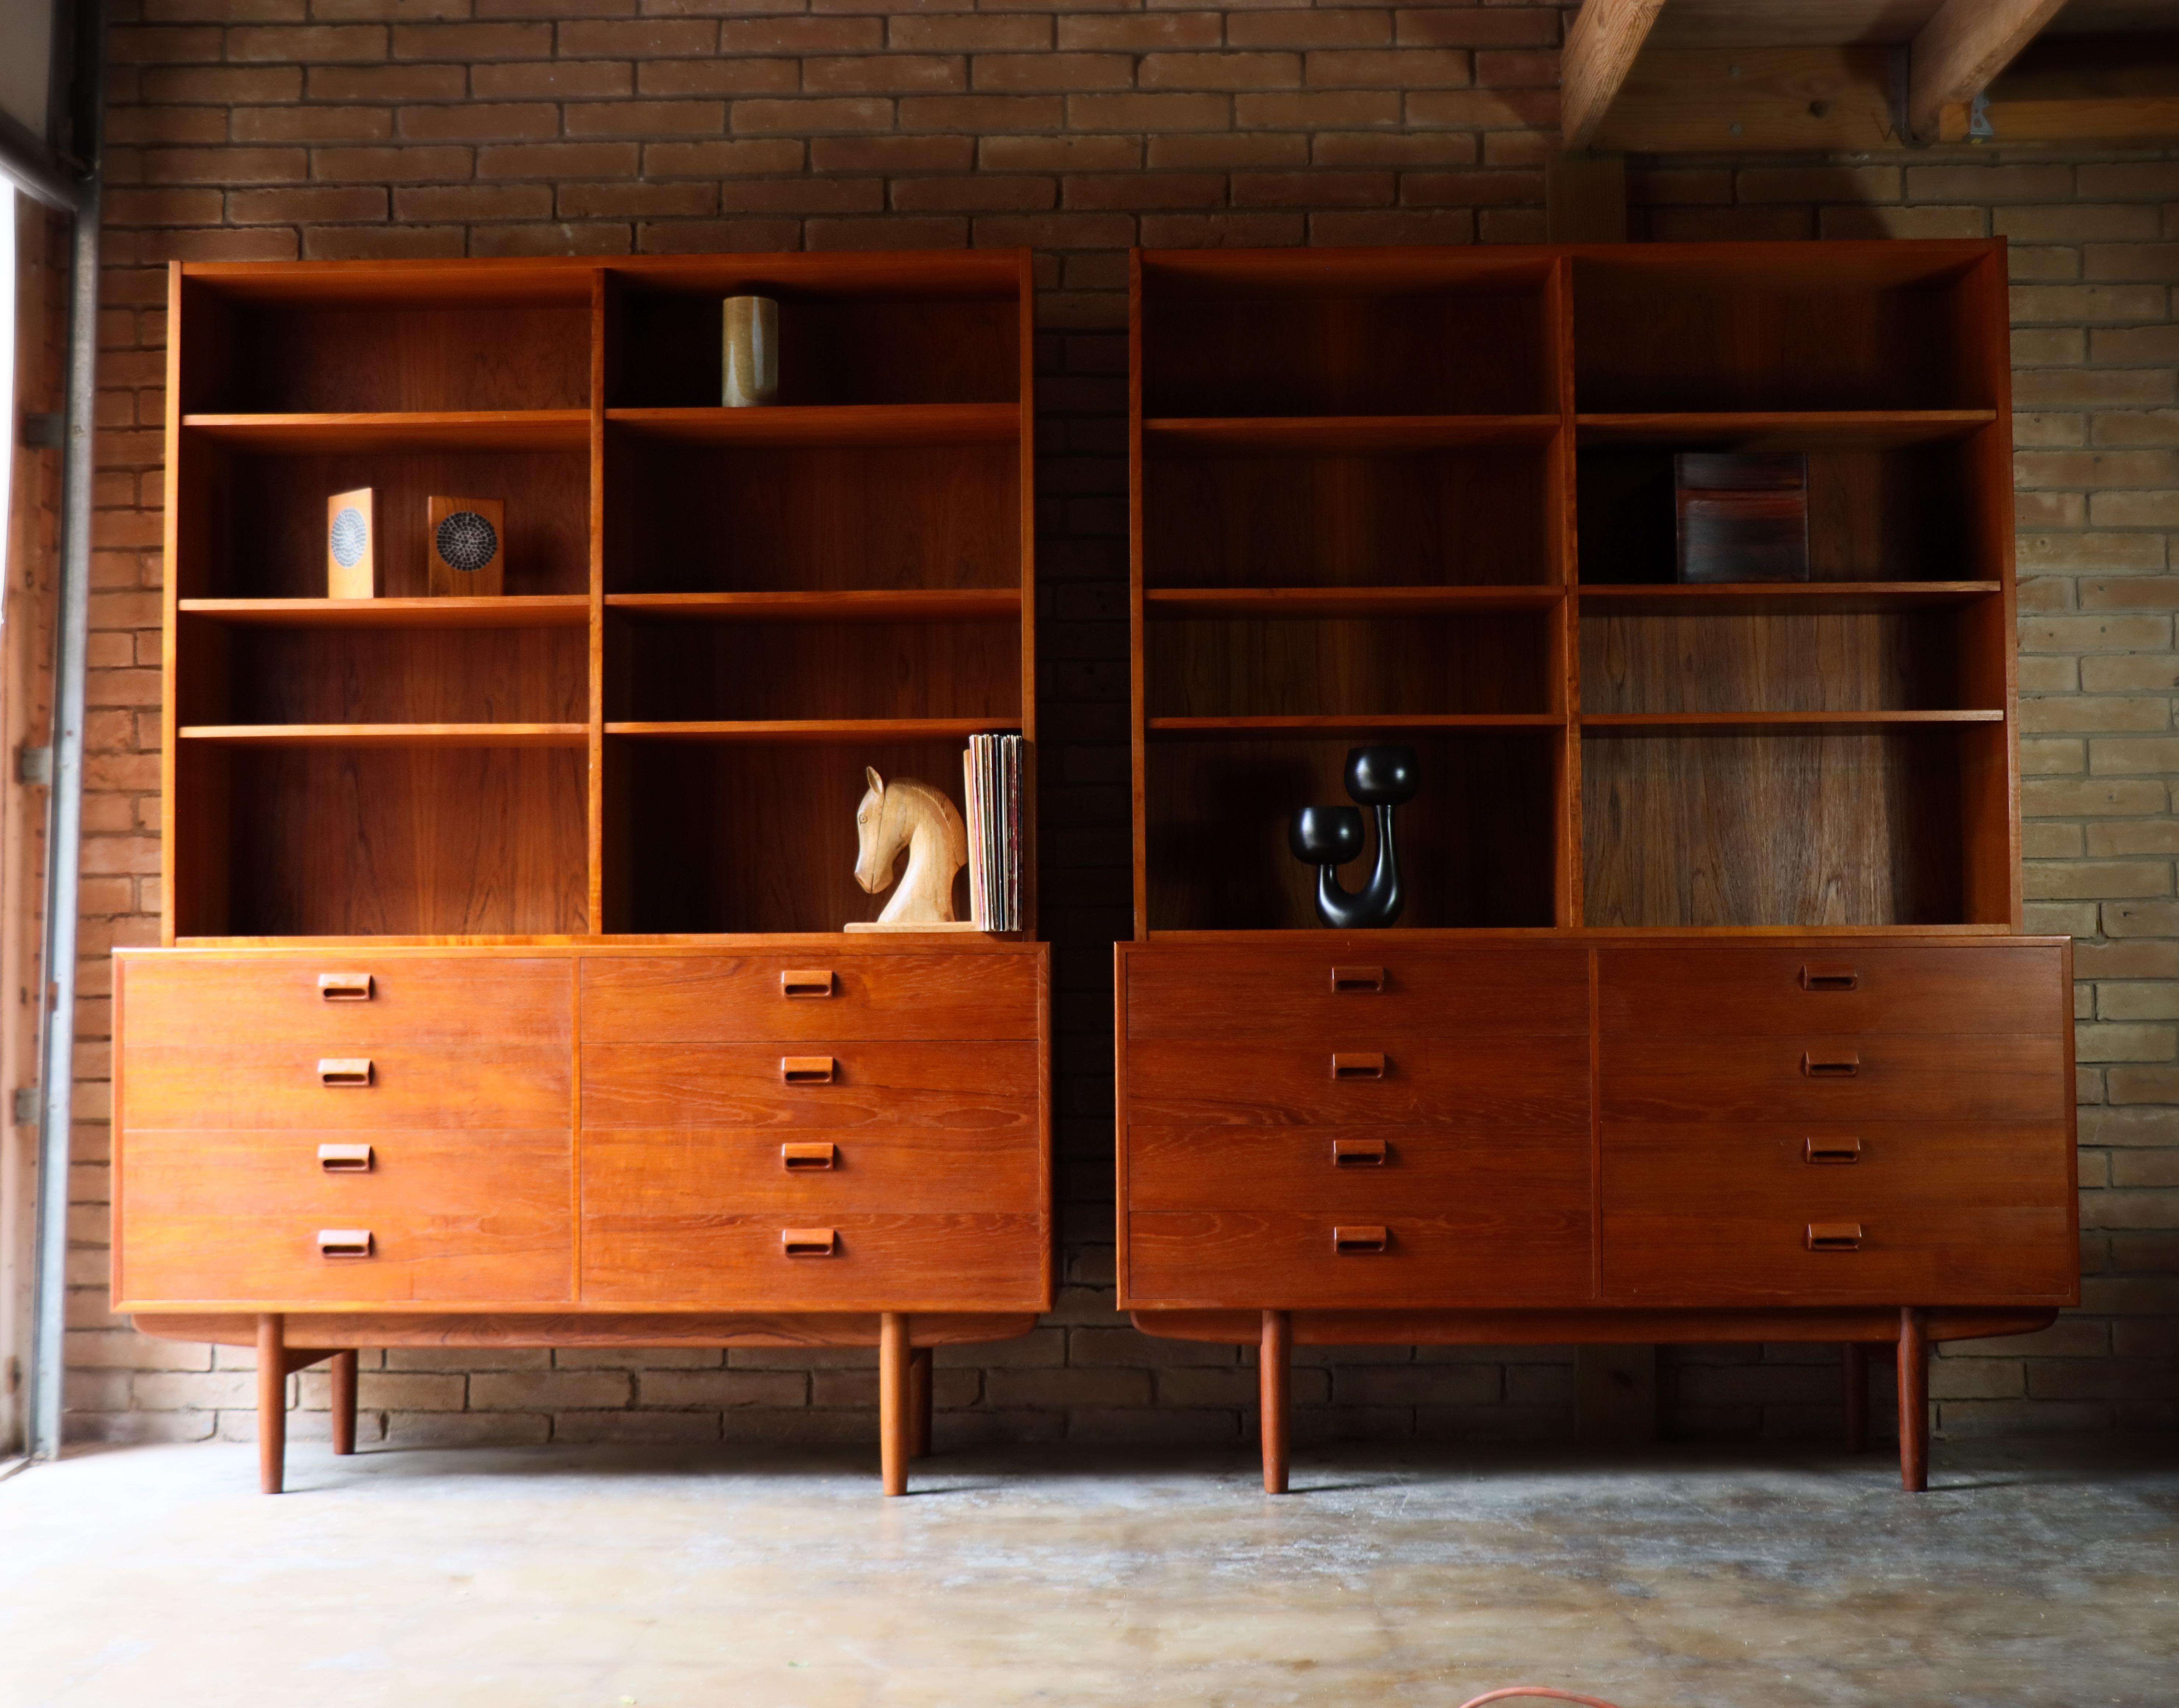 *pair available - priced individually* 

A lovely 8 drawer dresser chests with bookcase tops designed by Borge Mogensen for Soborg-Denmark, 1960s. 

Executed in old growth teak these beautiful examples are one of the more iconic designs in Mogensens